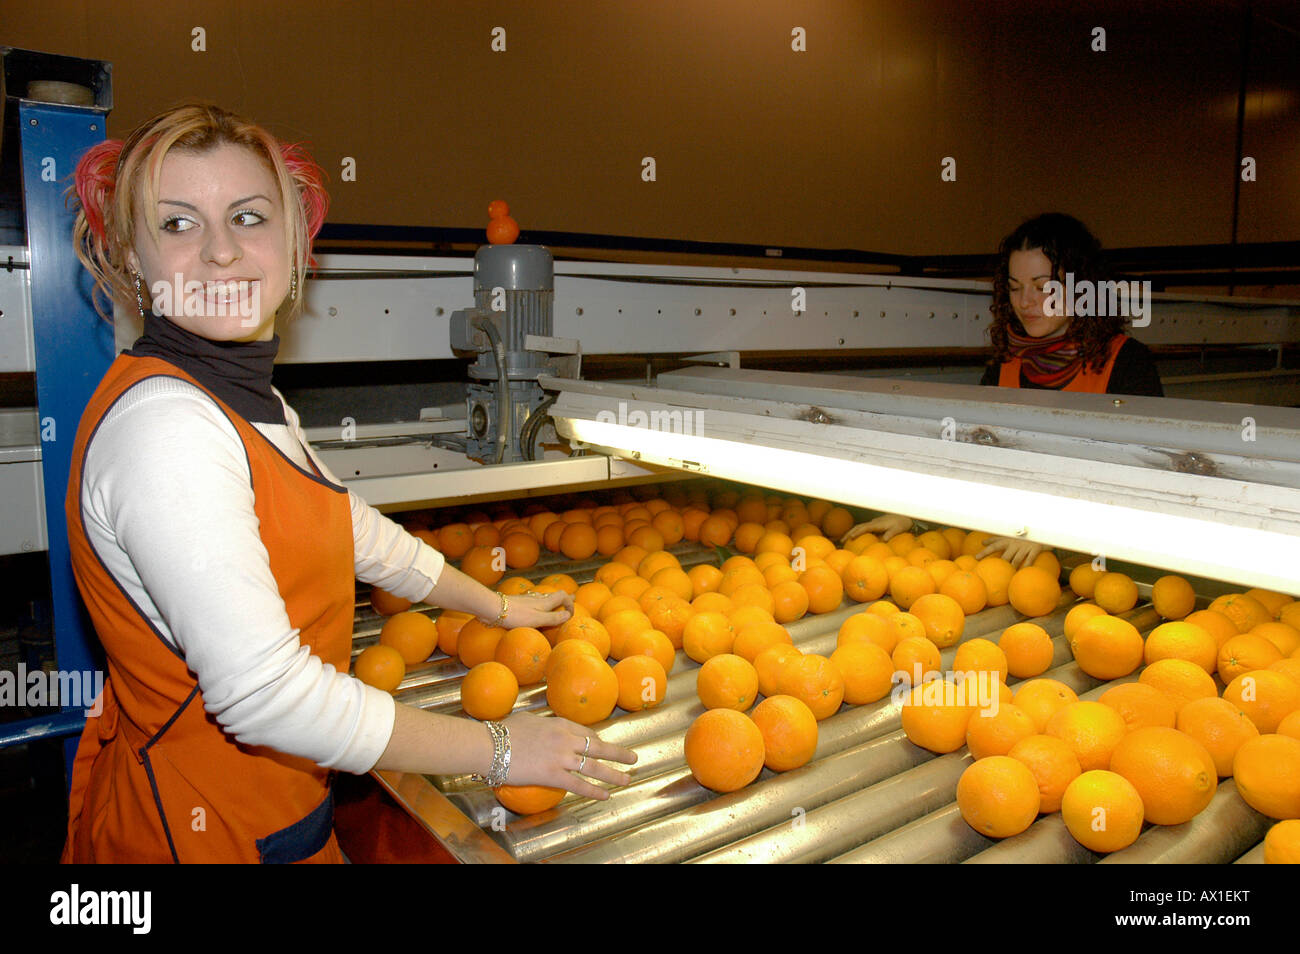 Orange packer conducting quality control at Guillem Exports' orange packing factory in Valencia, Spain, Europe Stock Photo